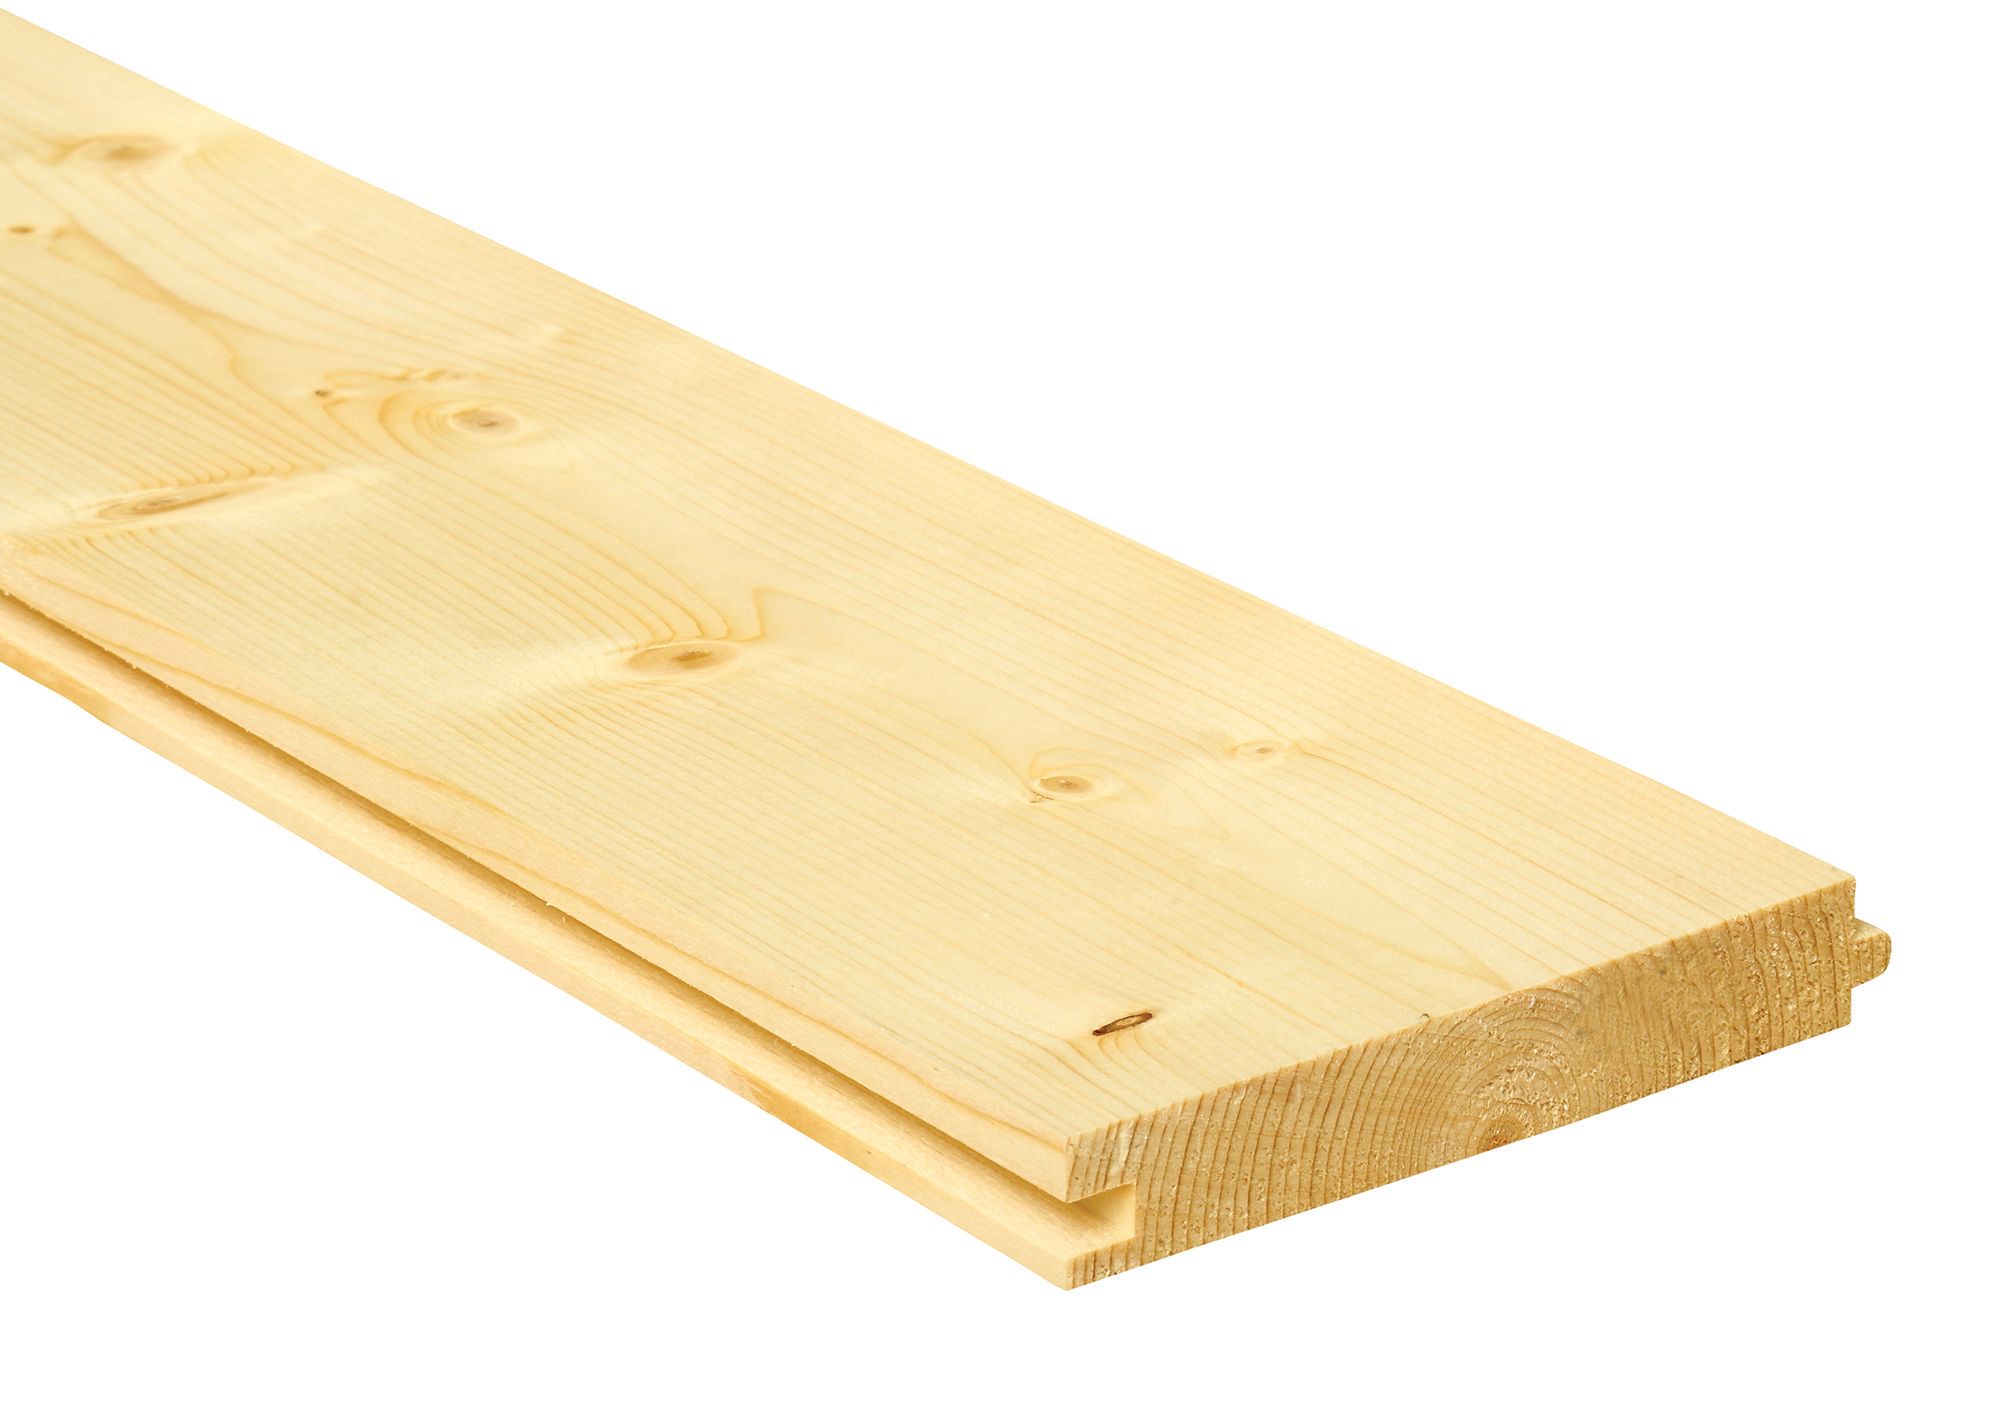 Image of Wickes PTG Timber Floorboards - 18mm x 119mm x 1800mm